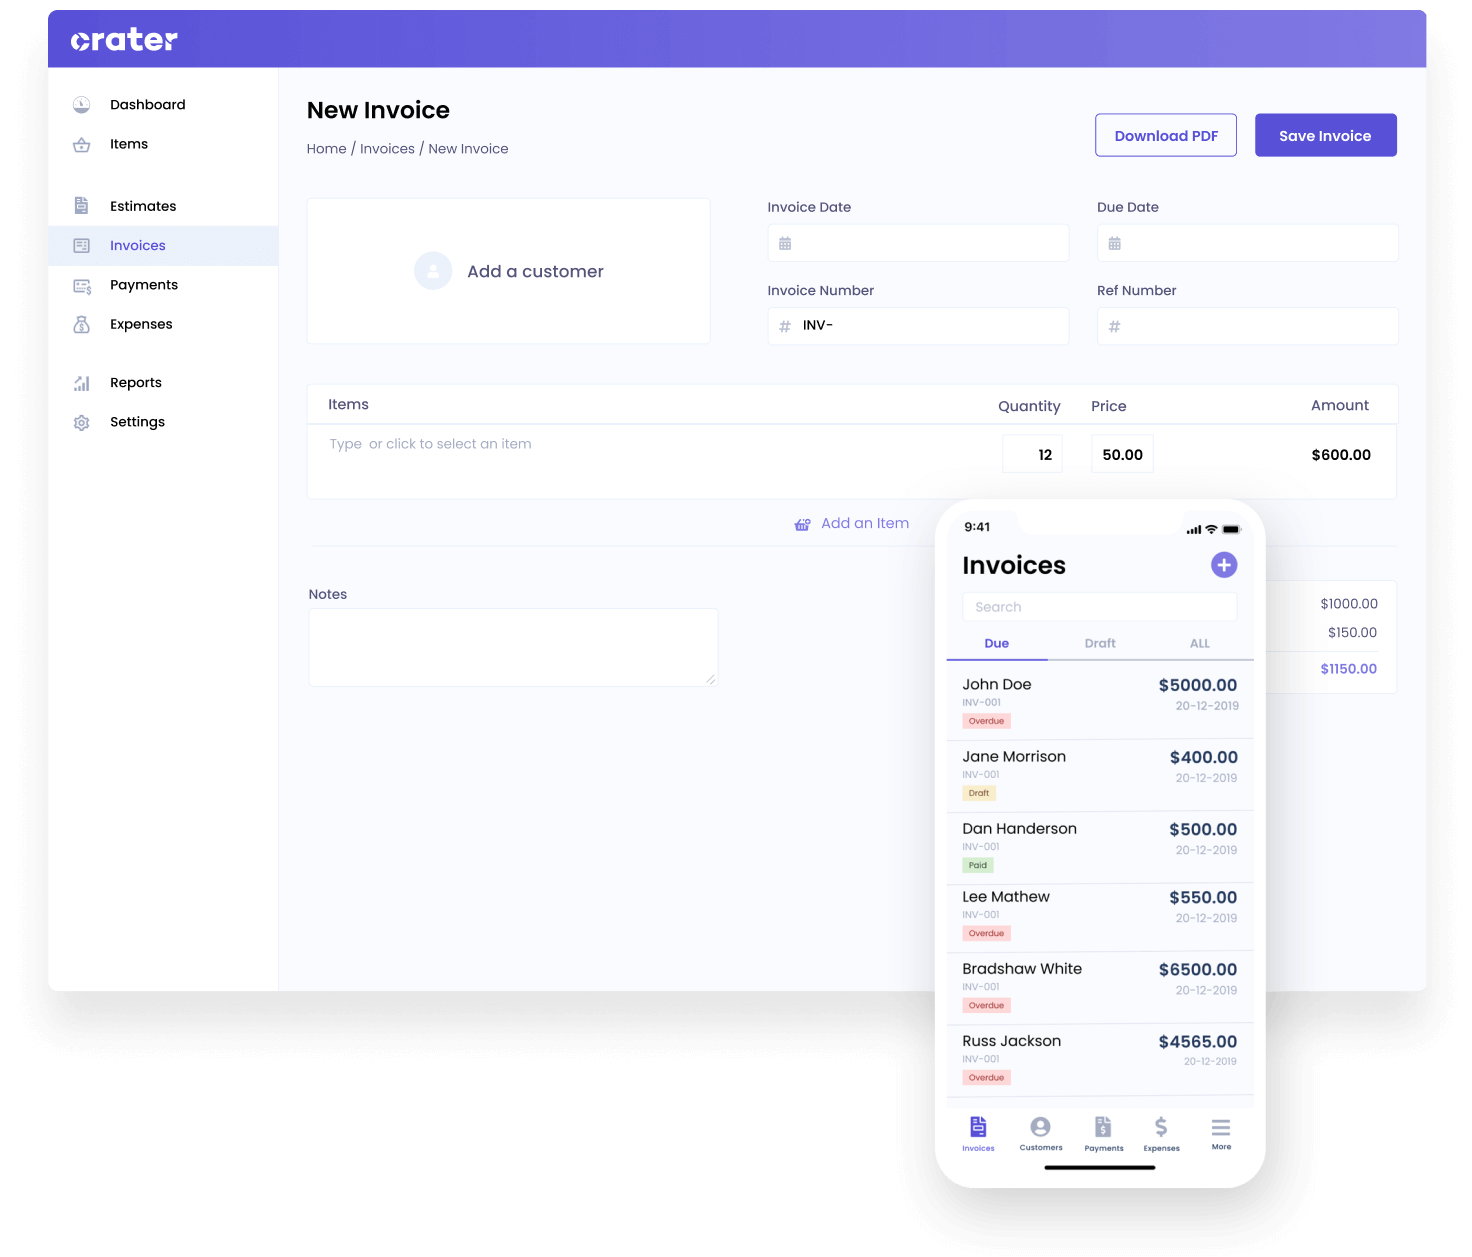 Crater is an open-source web & mobile app that helps you track expenses, and payments & create professional invoices & estimates